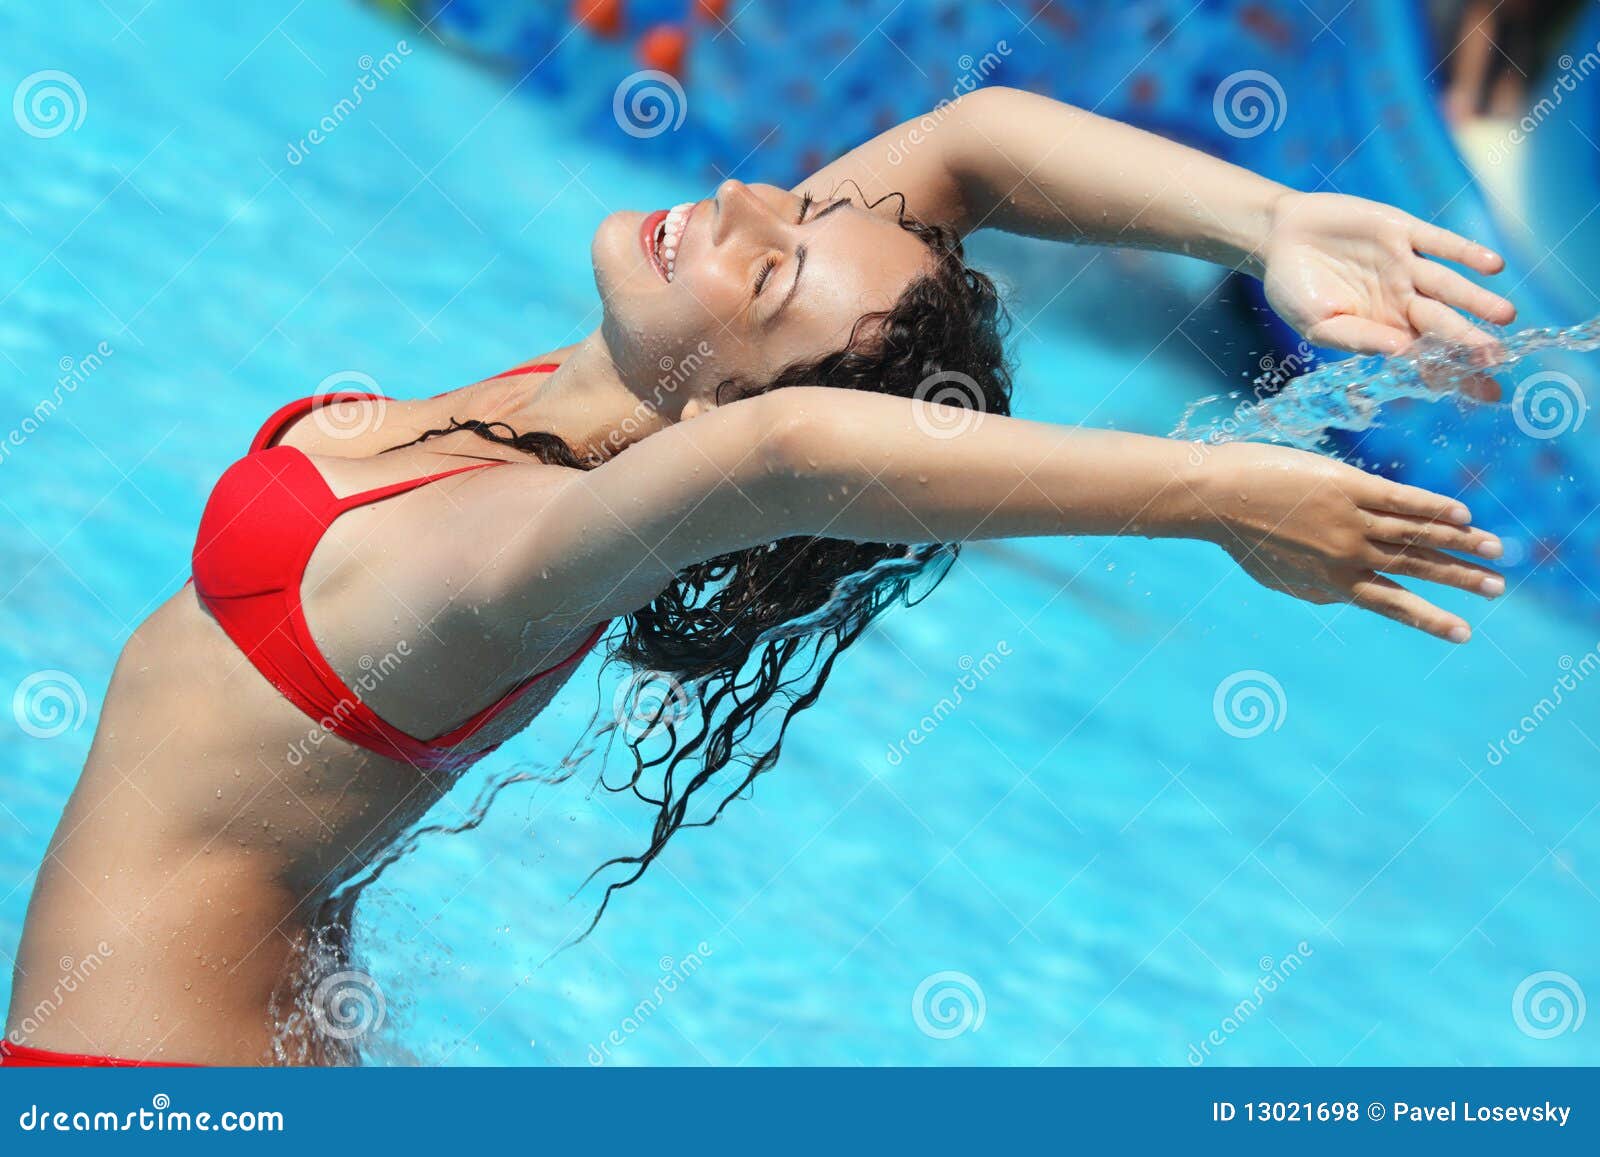 Beautiful Woman Bathes in Pool Under Water Stream Stock Photo